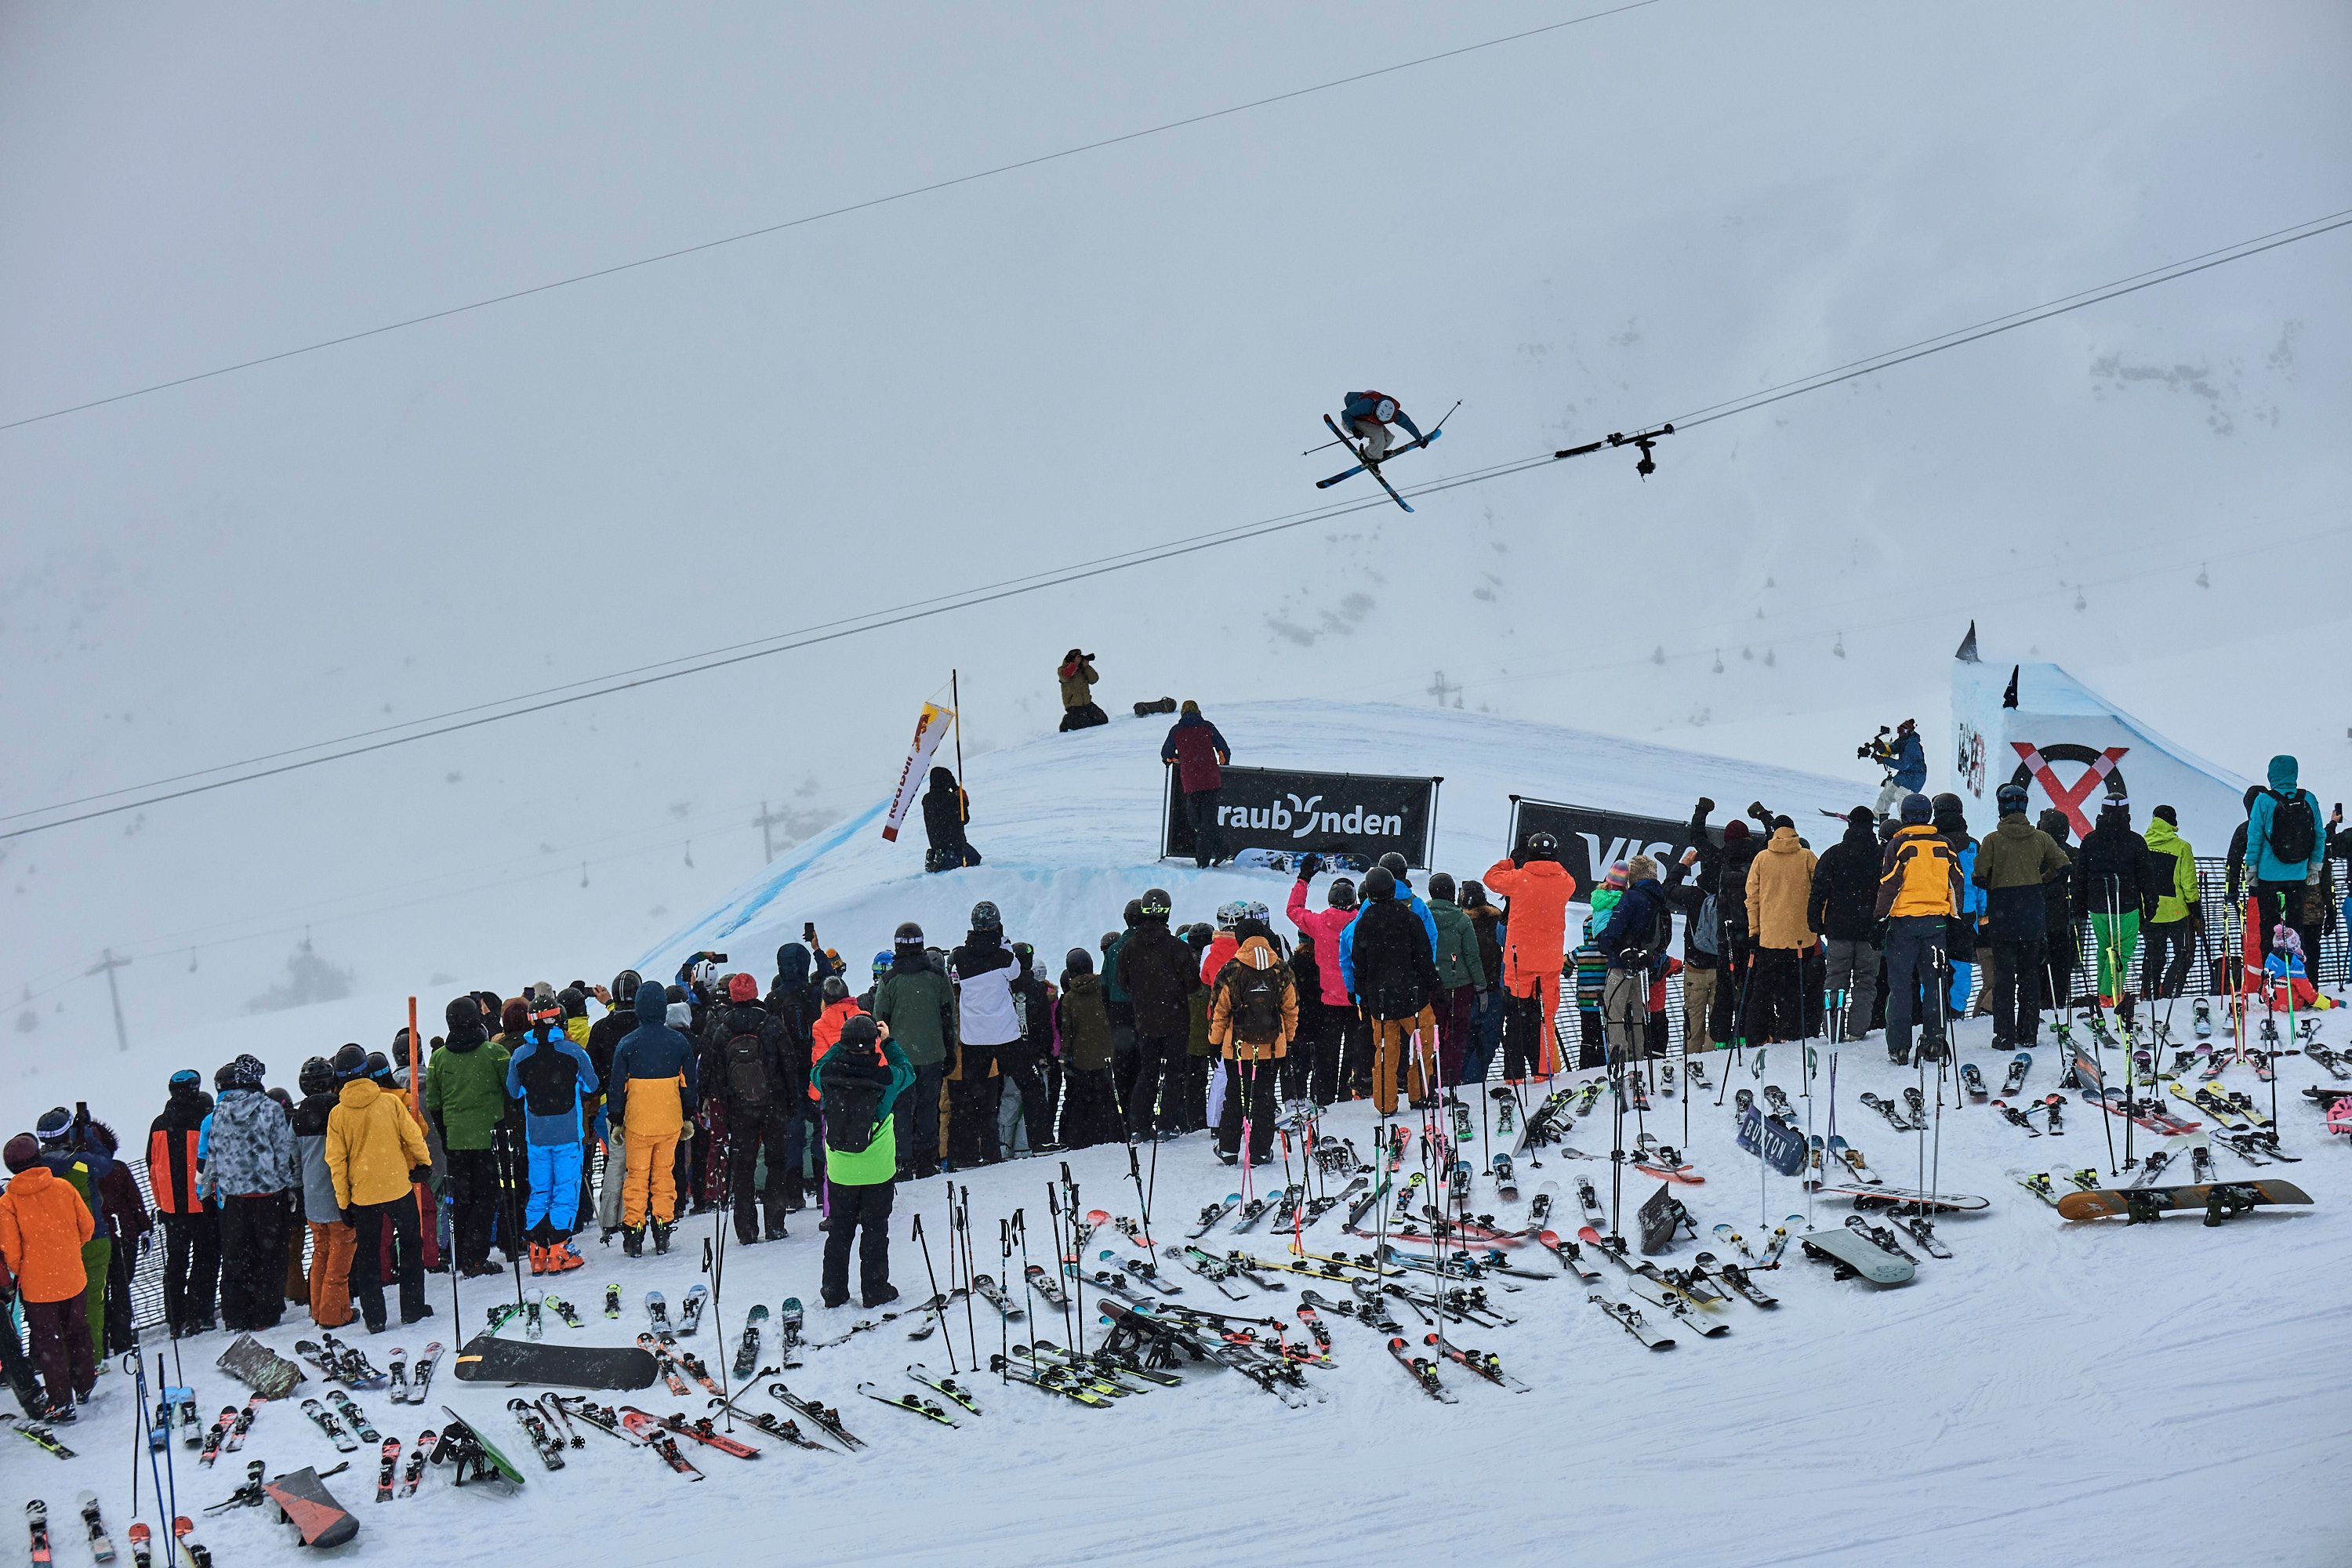 Premier victories for Johanne Killi and Andri Ragettli at the FIS Freeski World Cup in LAAX